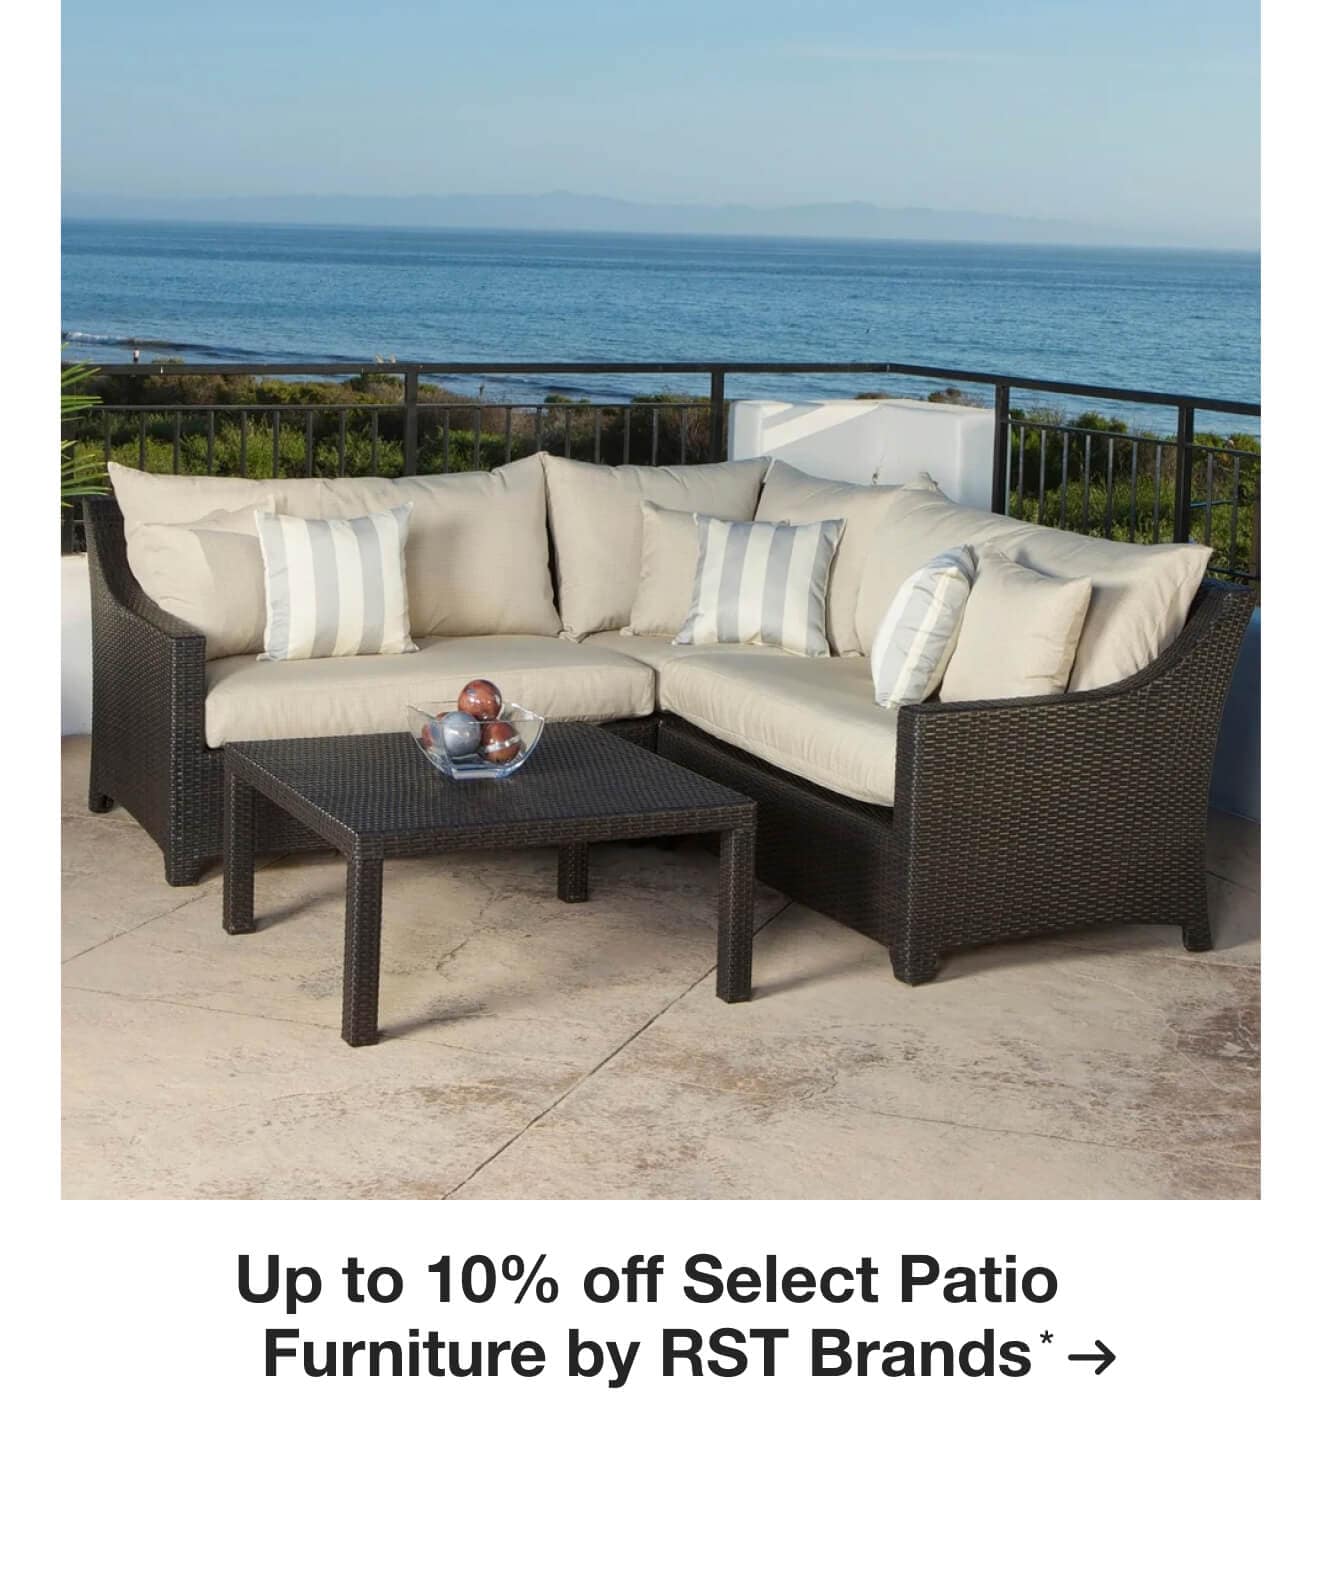 Up to 10% off Select Patio Furniture by RST Brands*